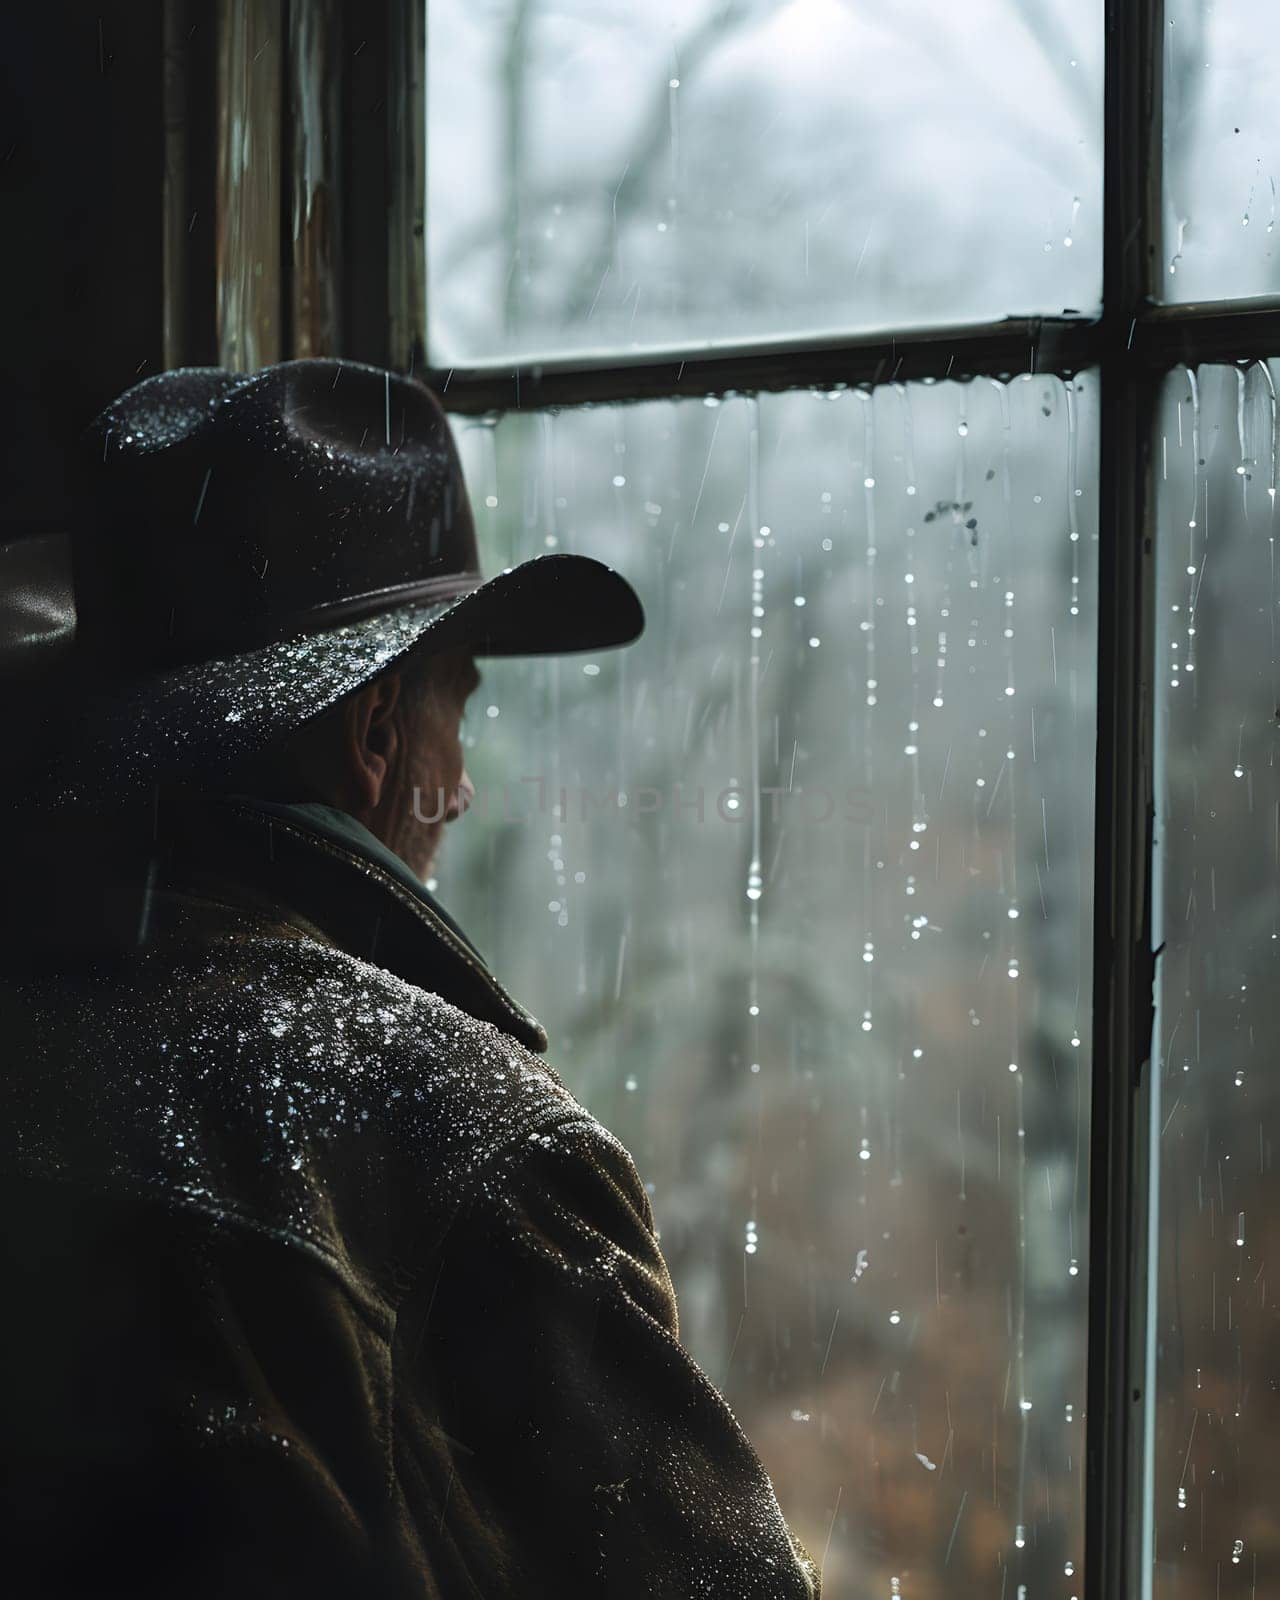 A man in a hat gazes out a tinted window on a rainy day, surrounded by darkness by Nadtochiy